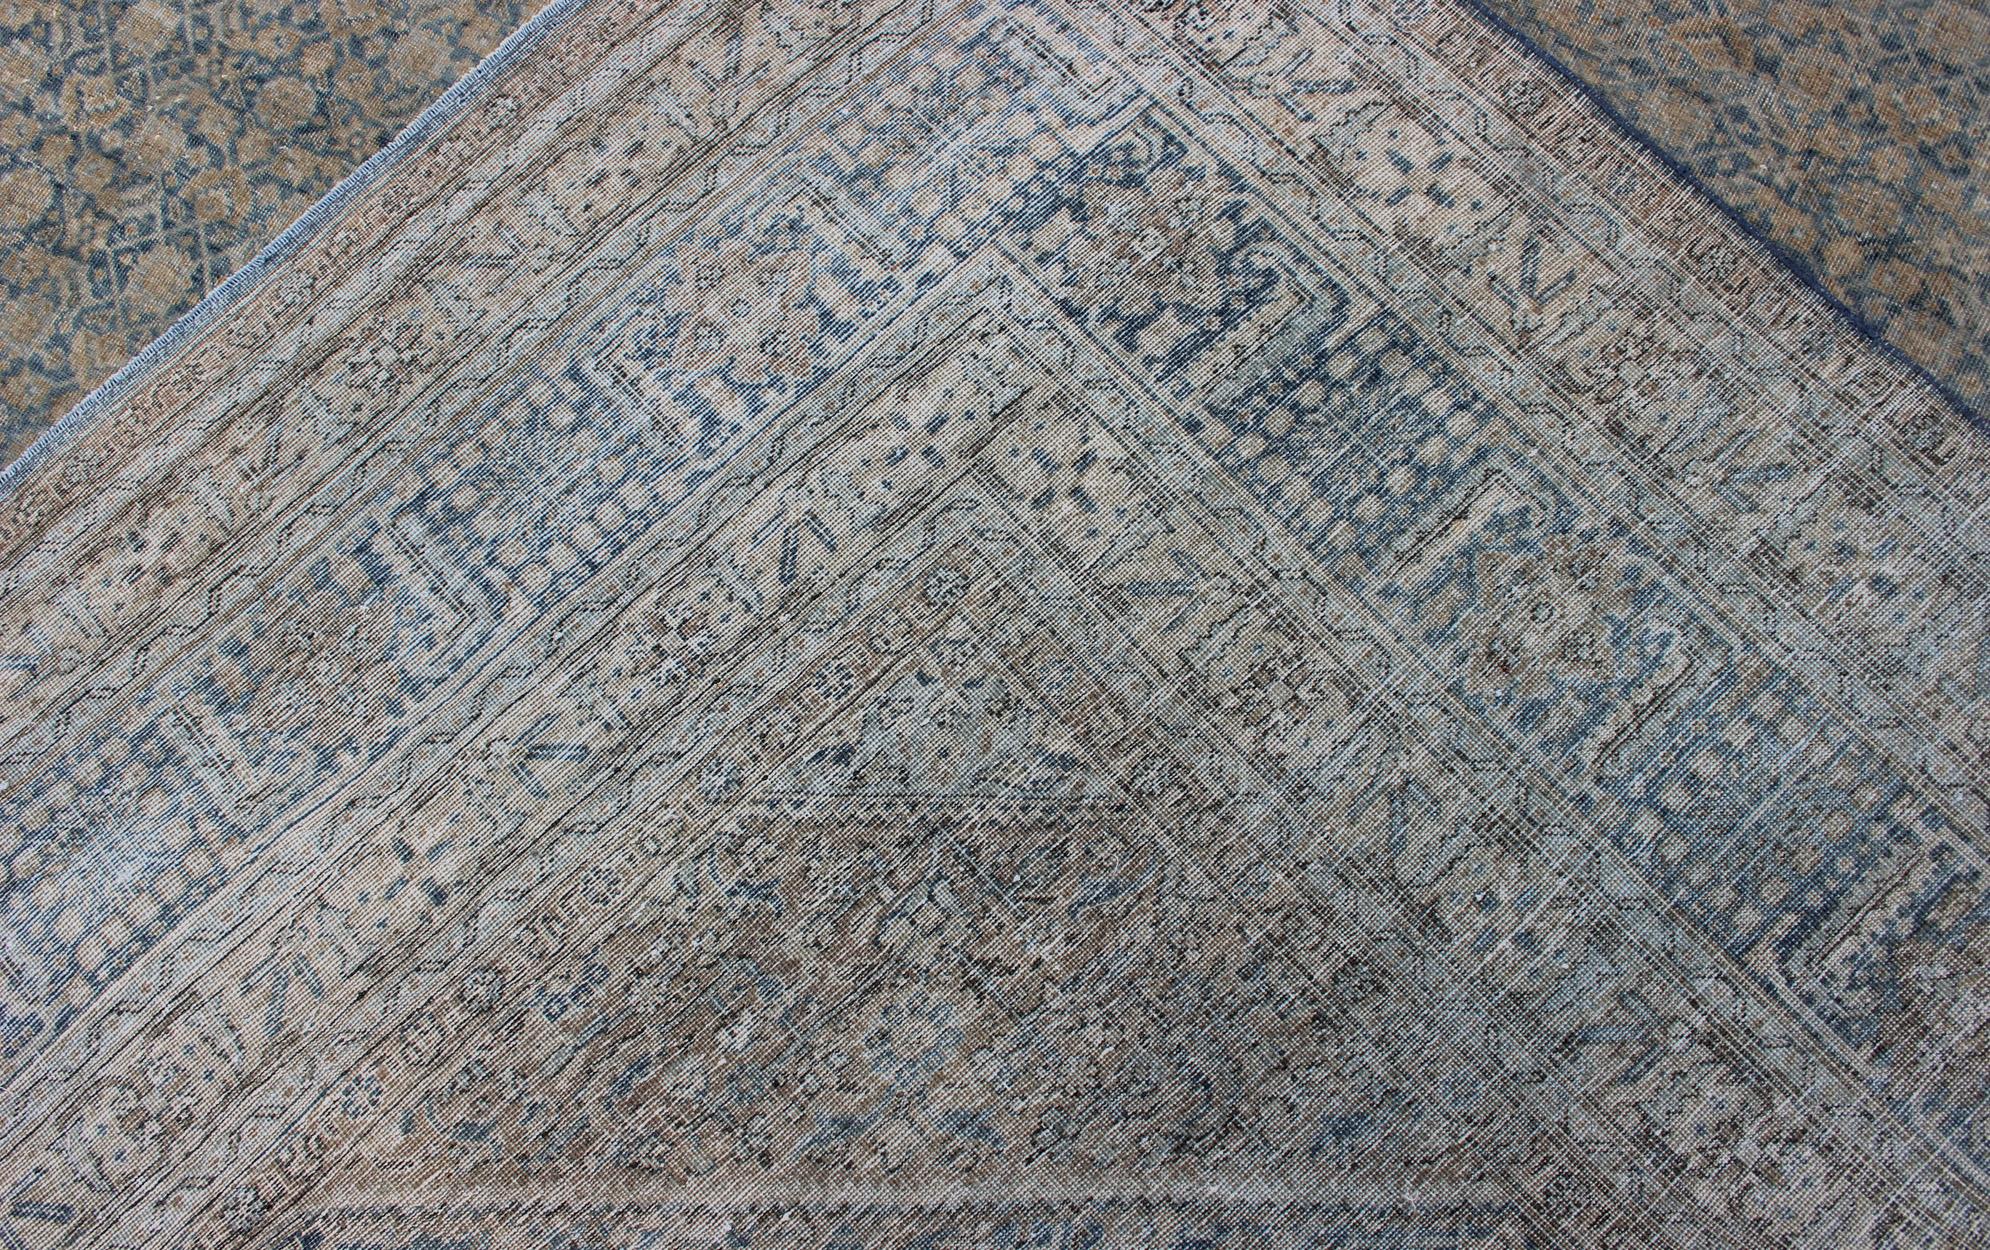 Large Antique Persian Tabriz Rug in All-Over Herati in Shades of Blue and Tan  For Sale 11